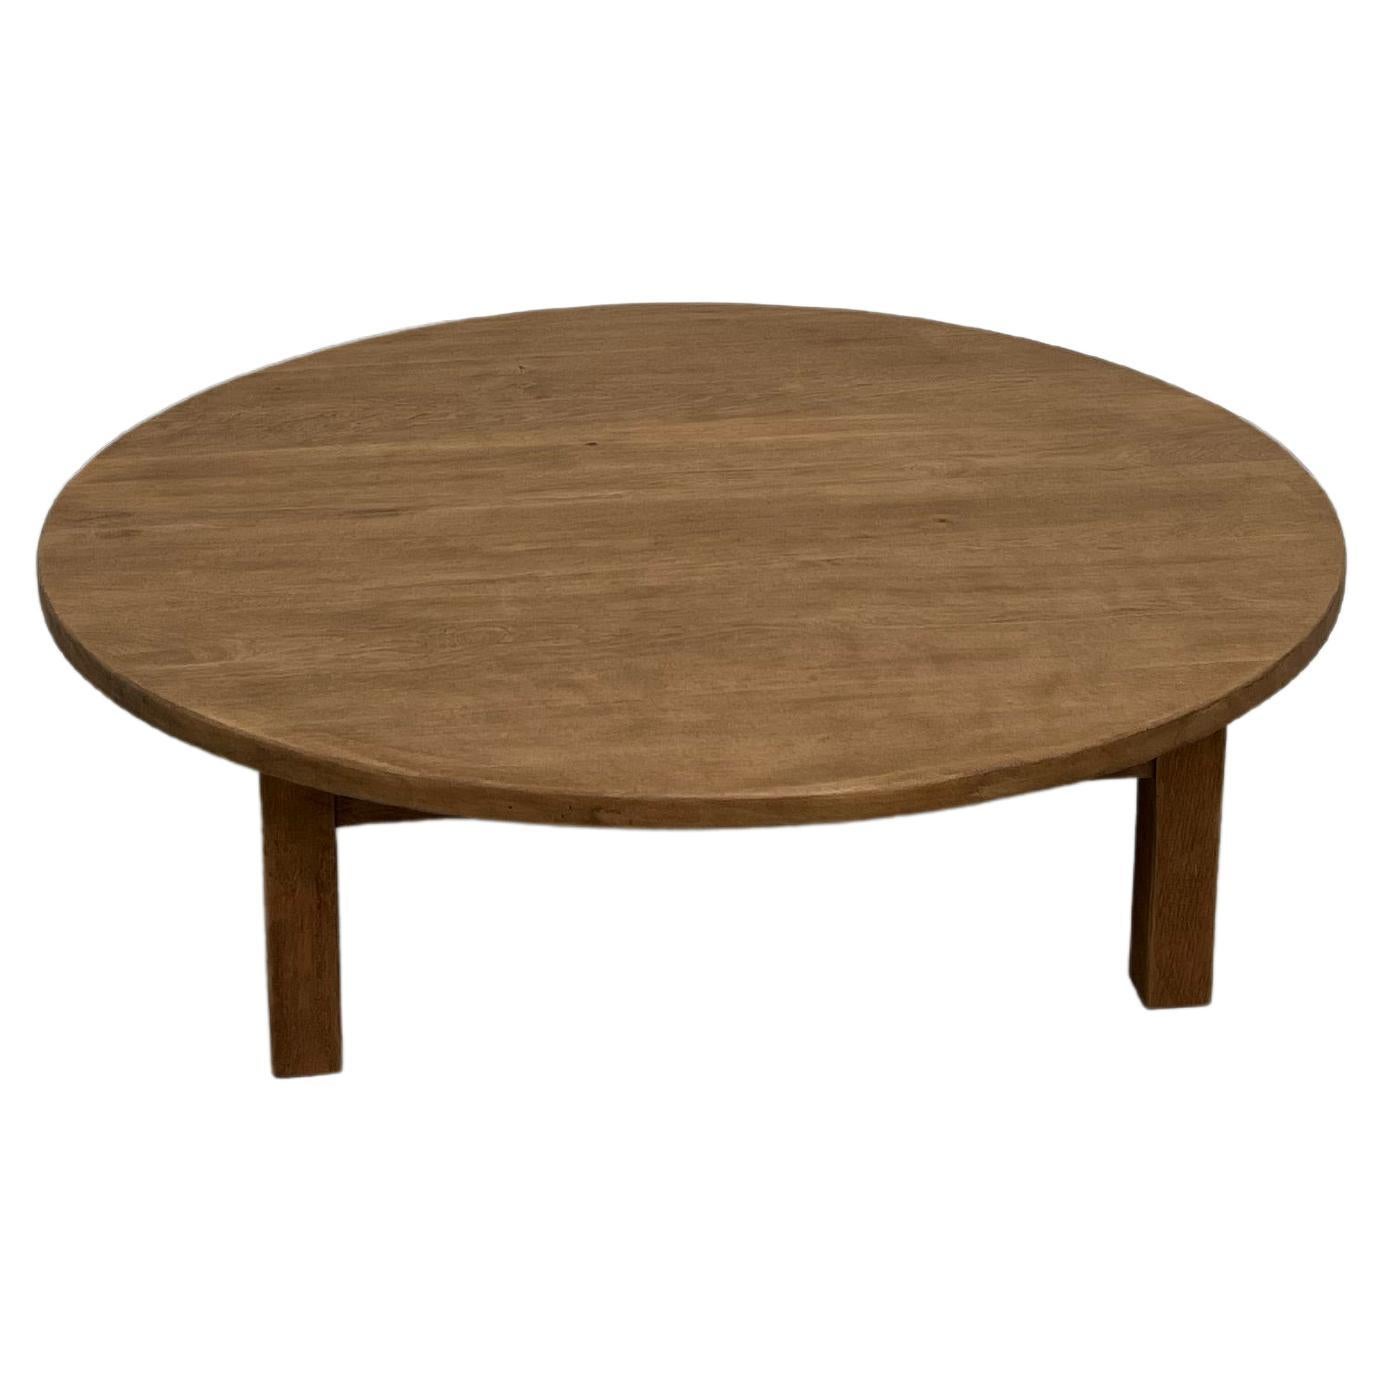 French arge circular coffee table from the 1950s, in oak